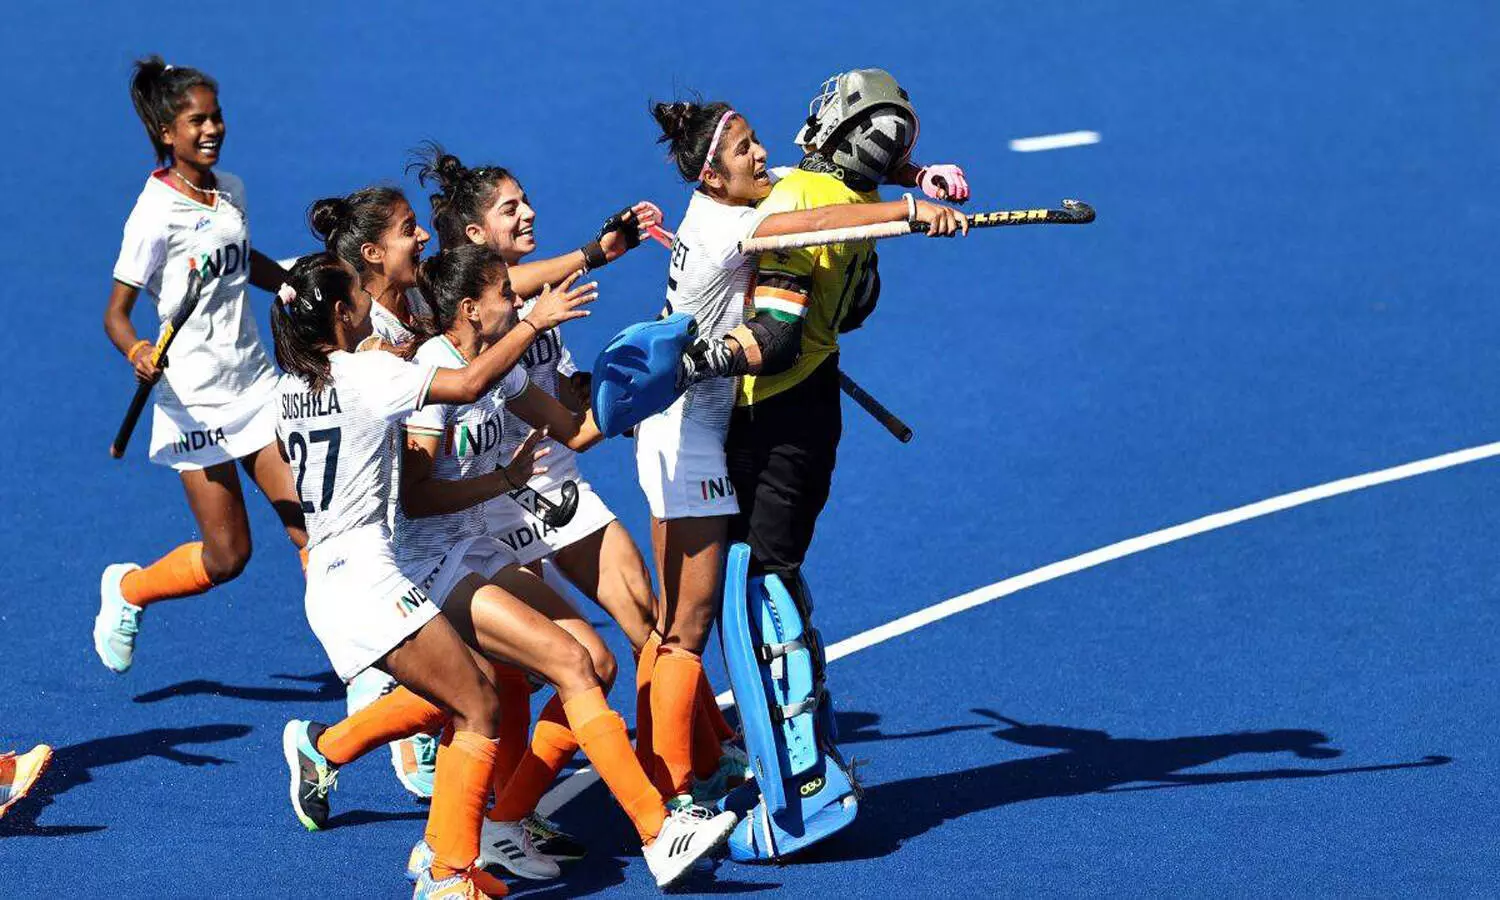 India beat New Zealand in thrilling shootout to win CWG 2022 bronze medal, end 16-year-long wait in womens hockey